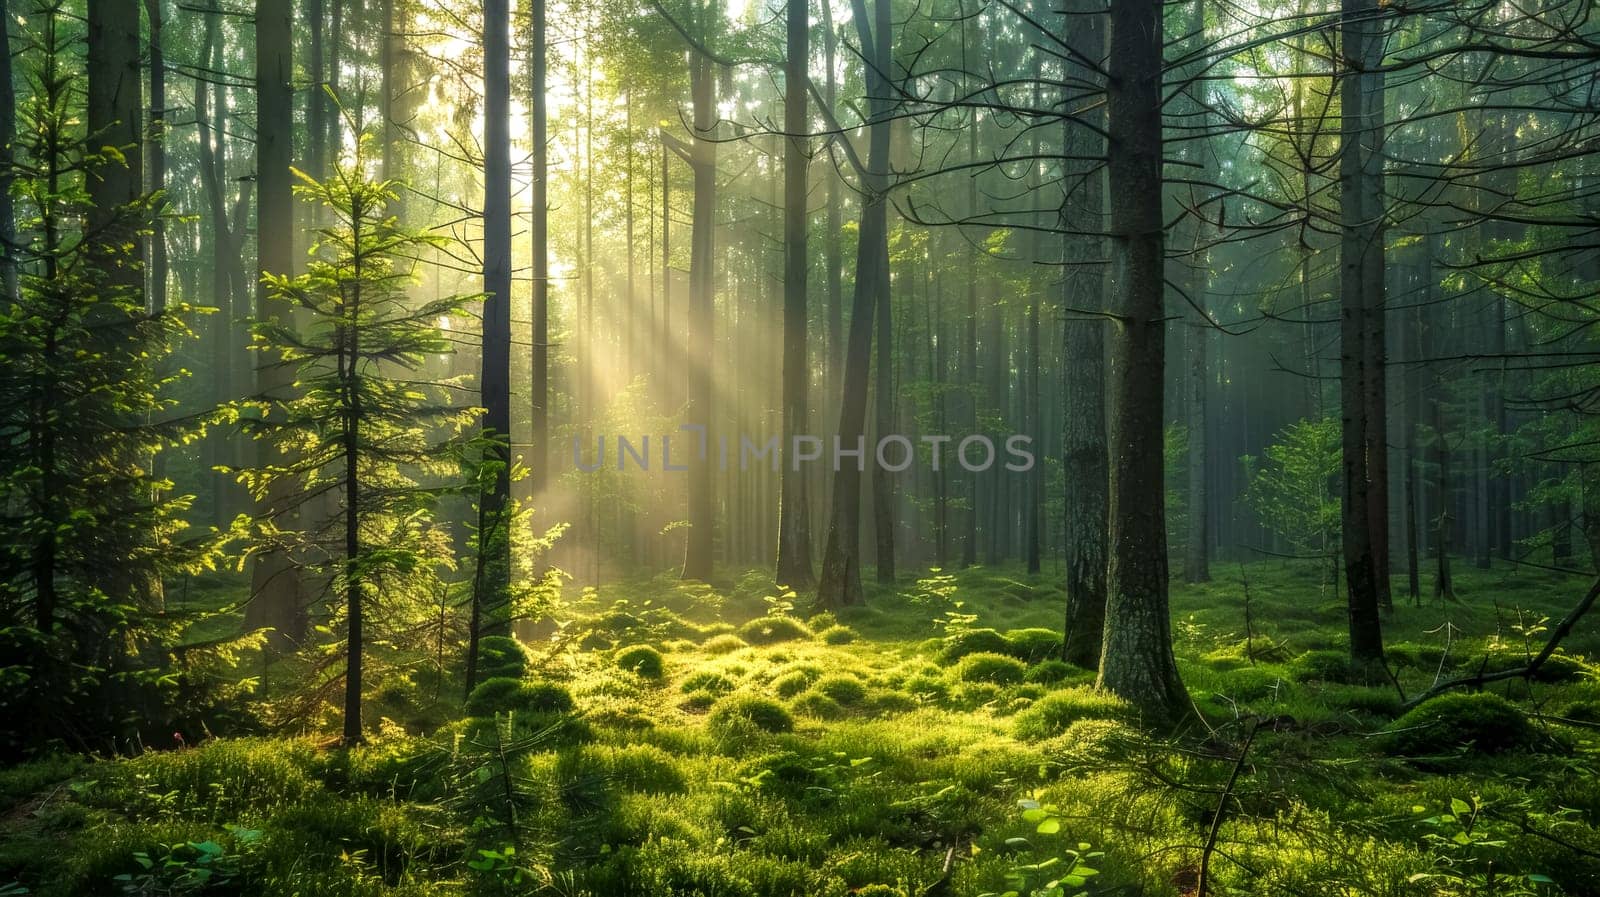 Enchanted forest sunbeams at dawn by Edophoto